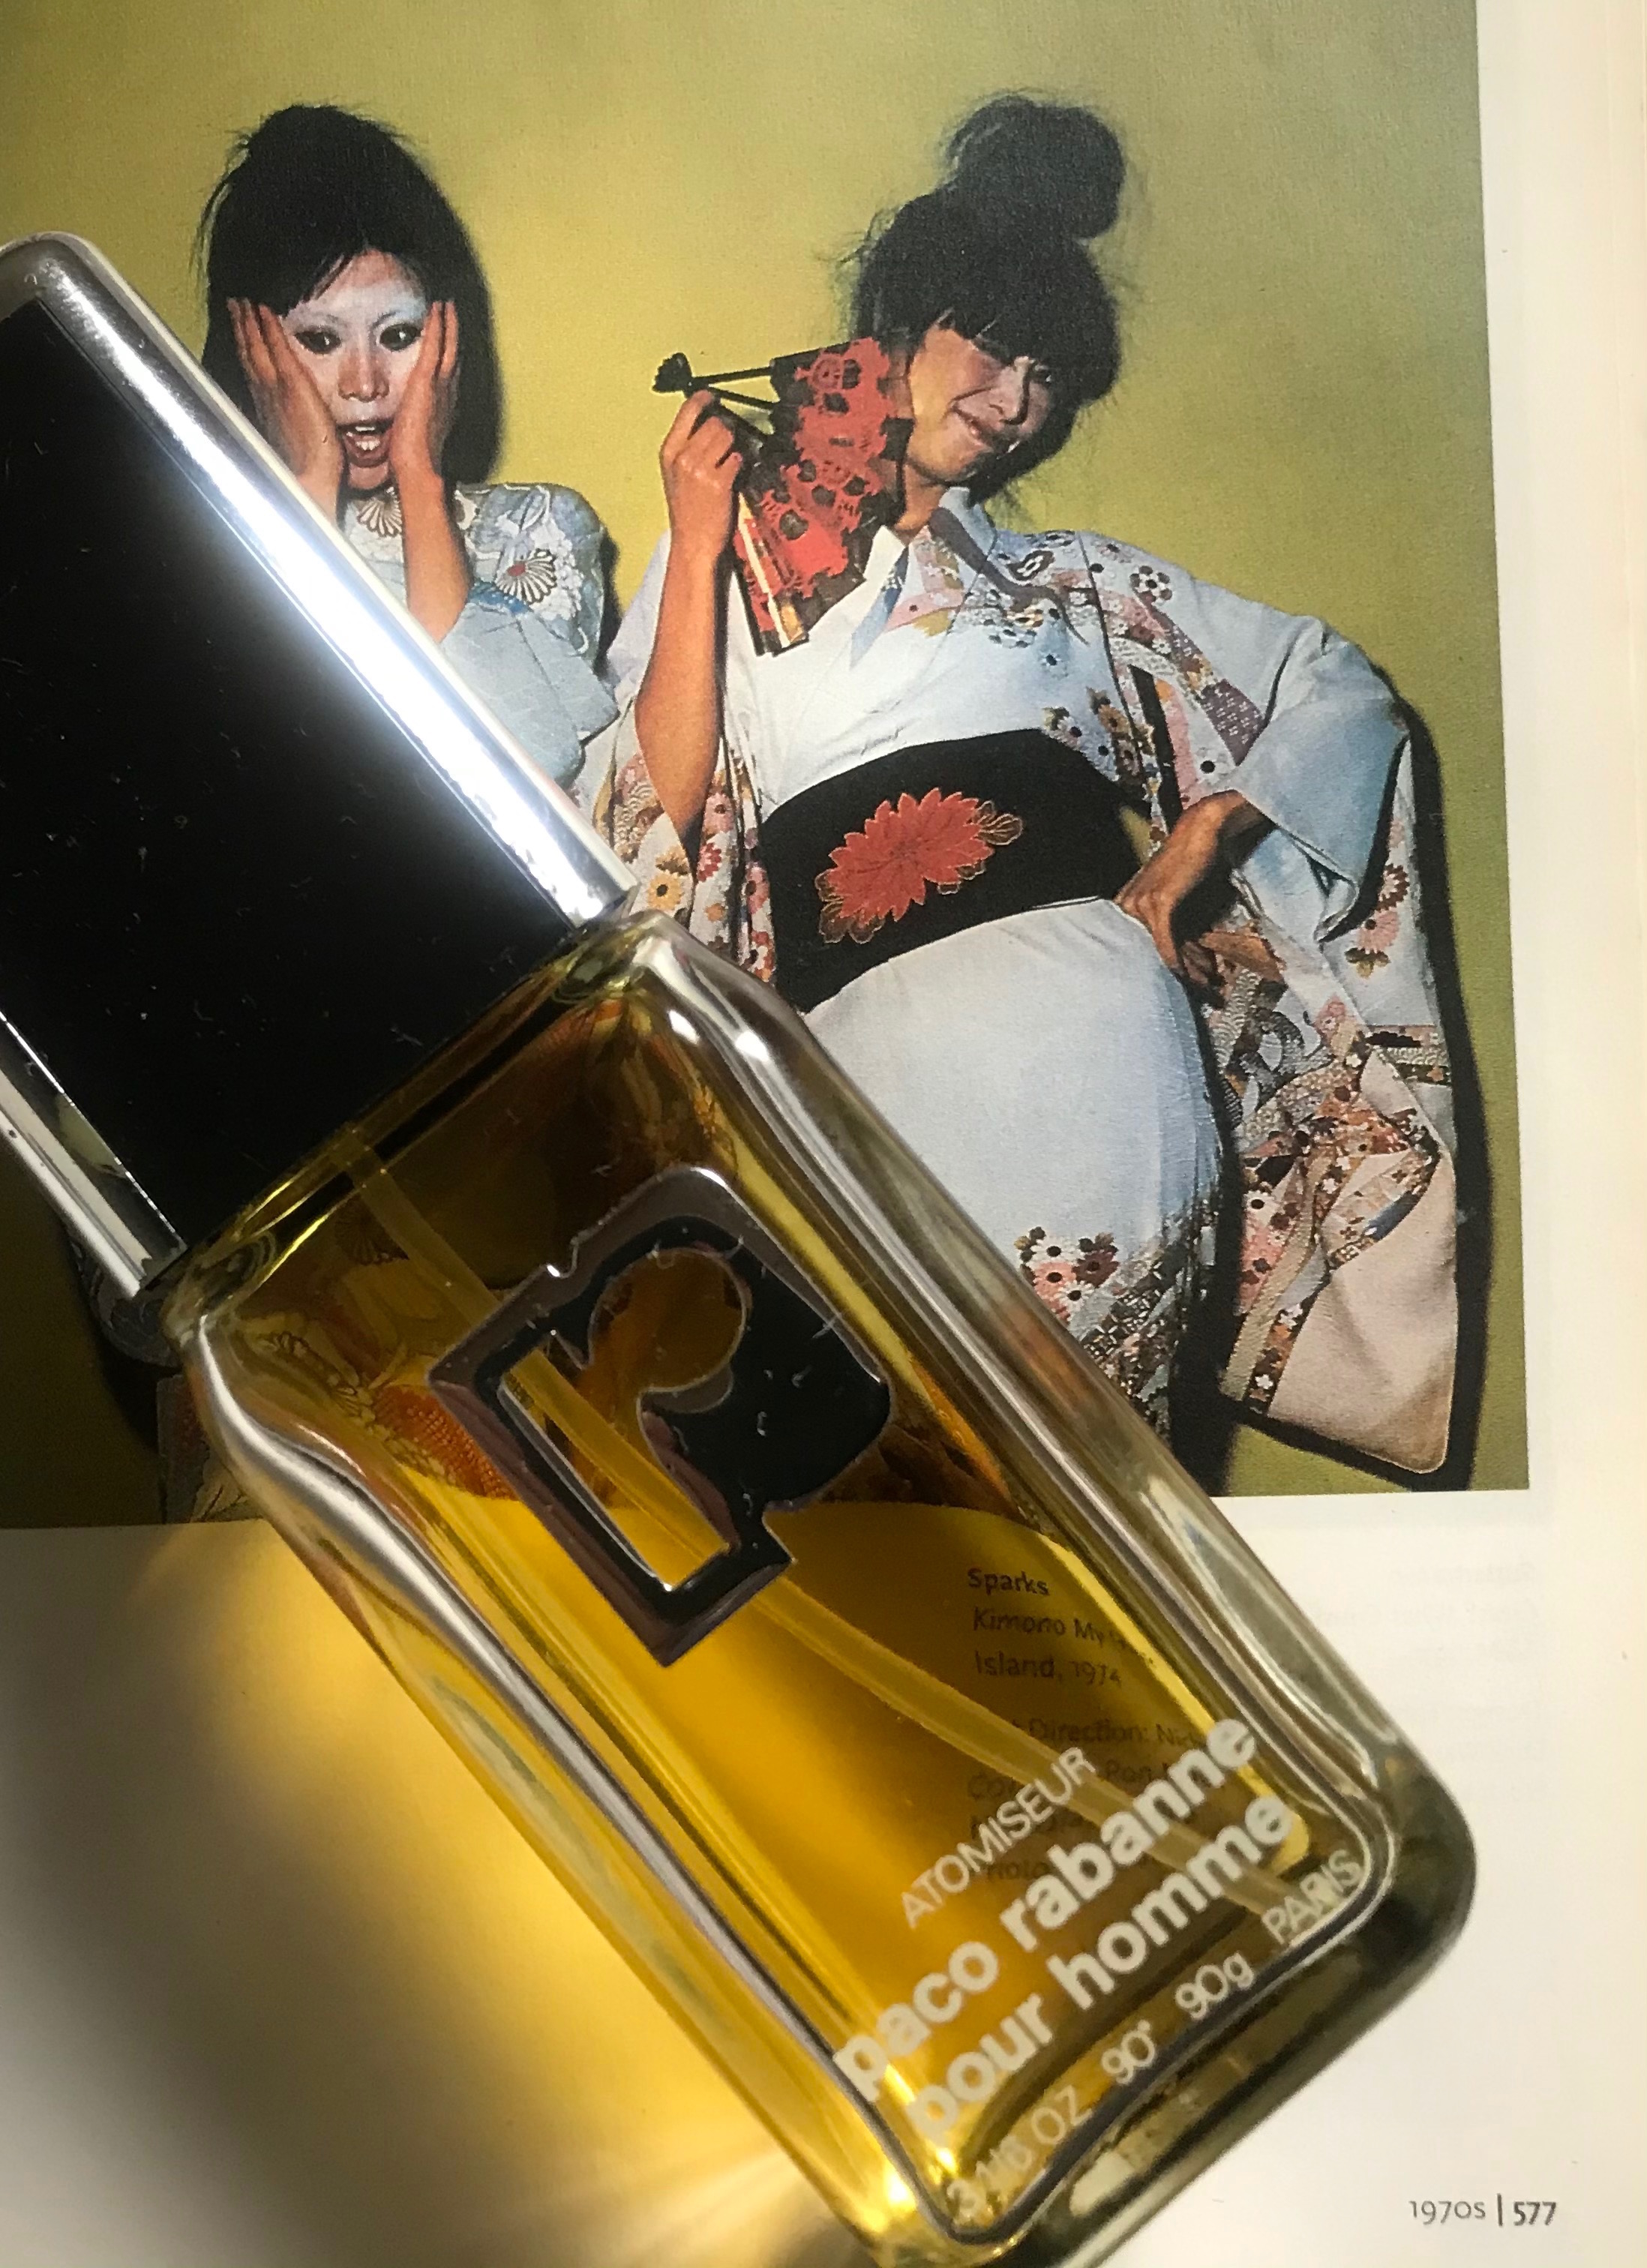 The wait is over: Celebrated perfume house Goutal Paris lands in